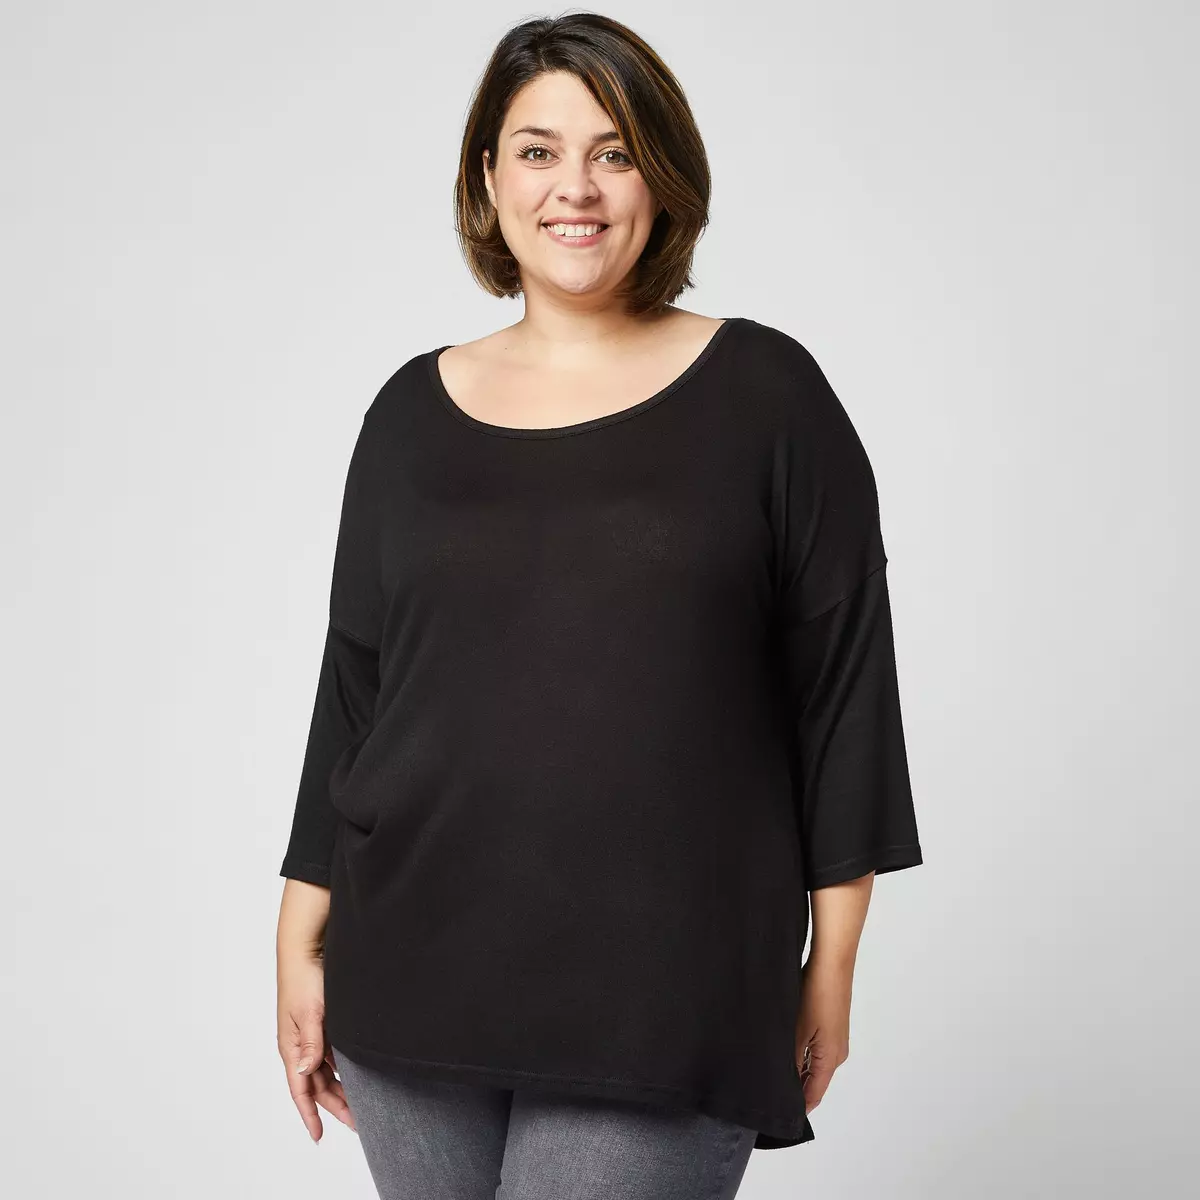 IN EXTENSO T-shirt manches 3/4 noir grande taille femme